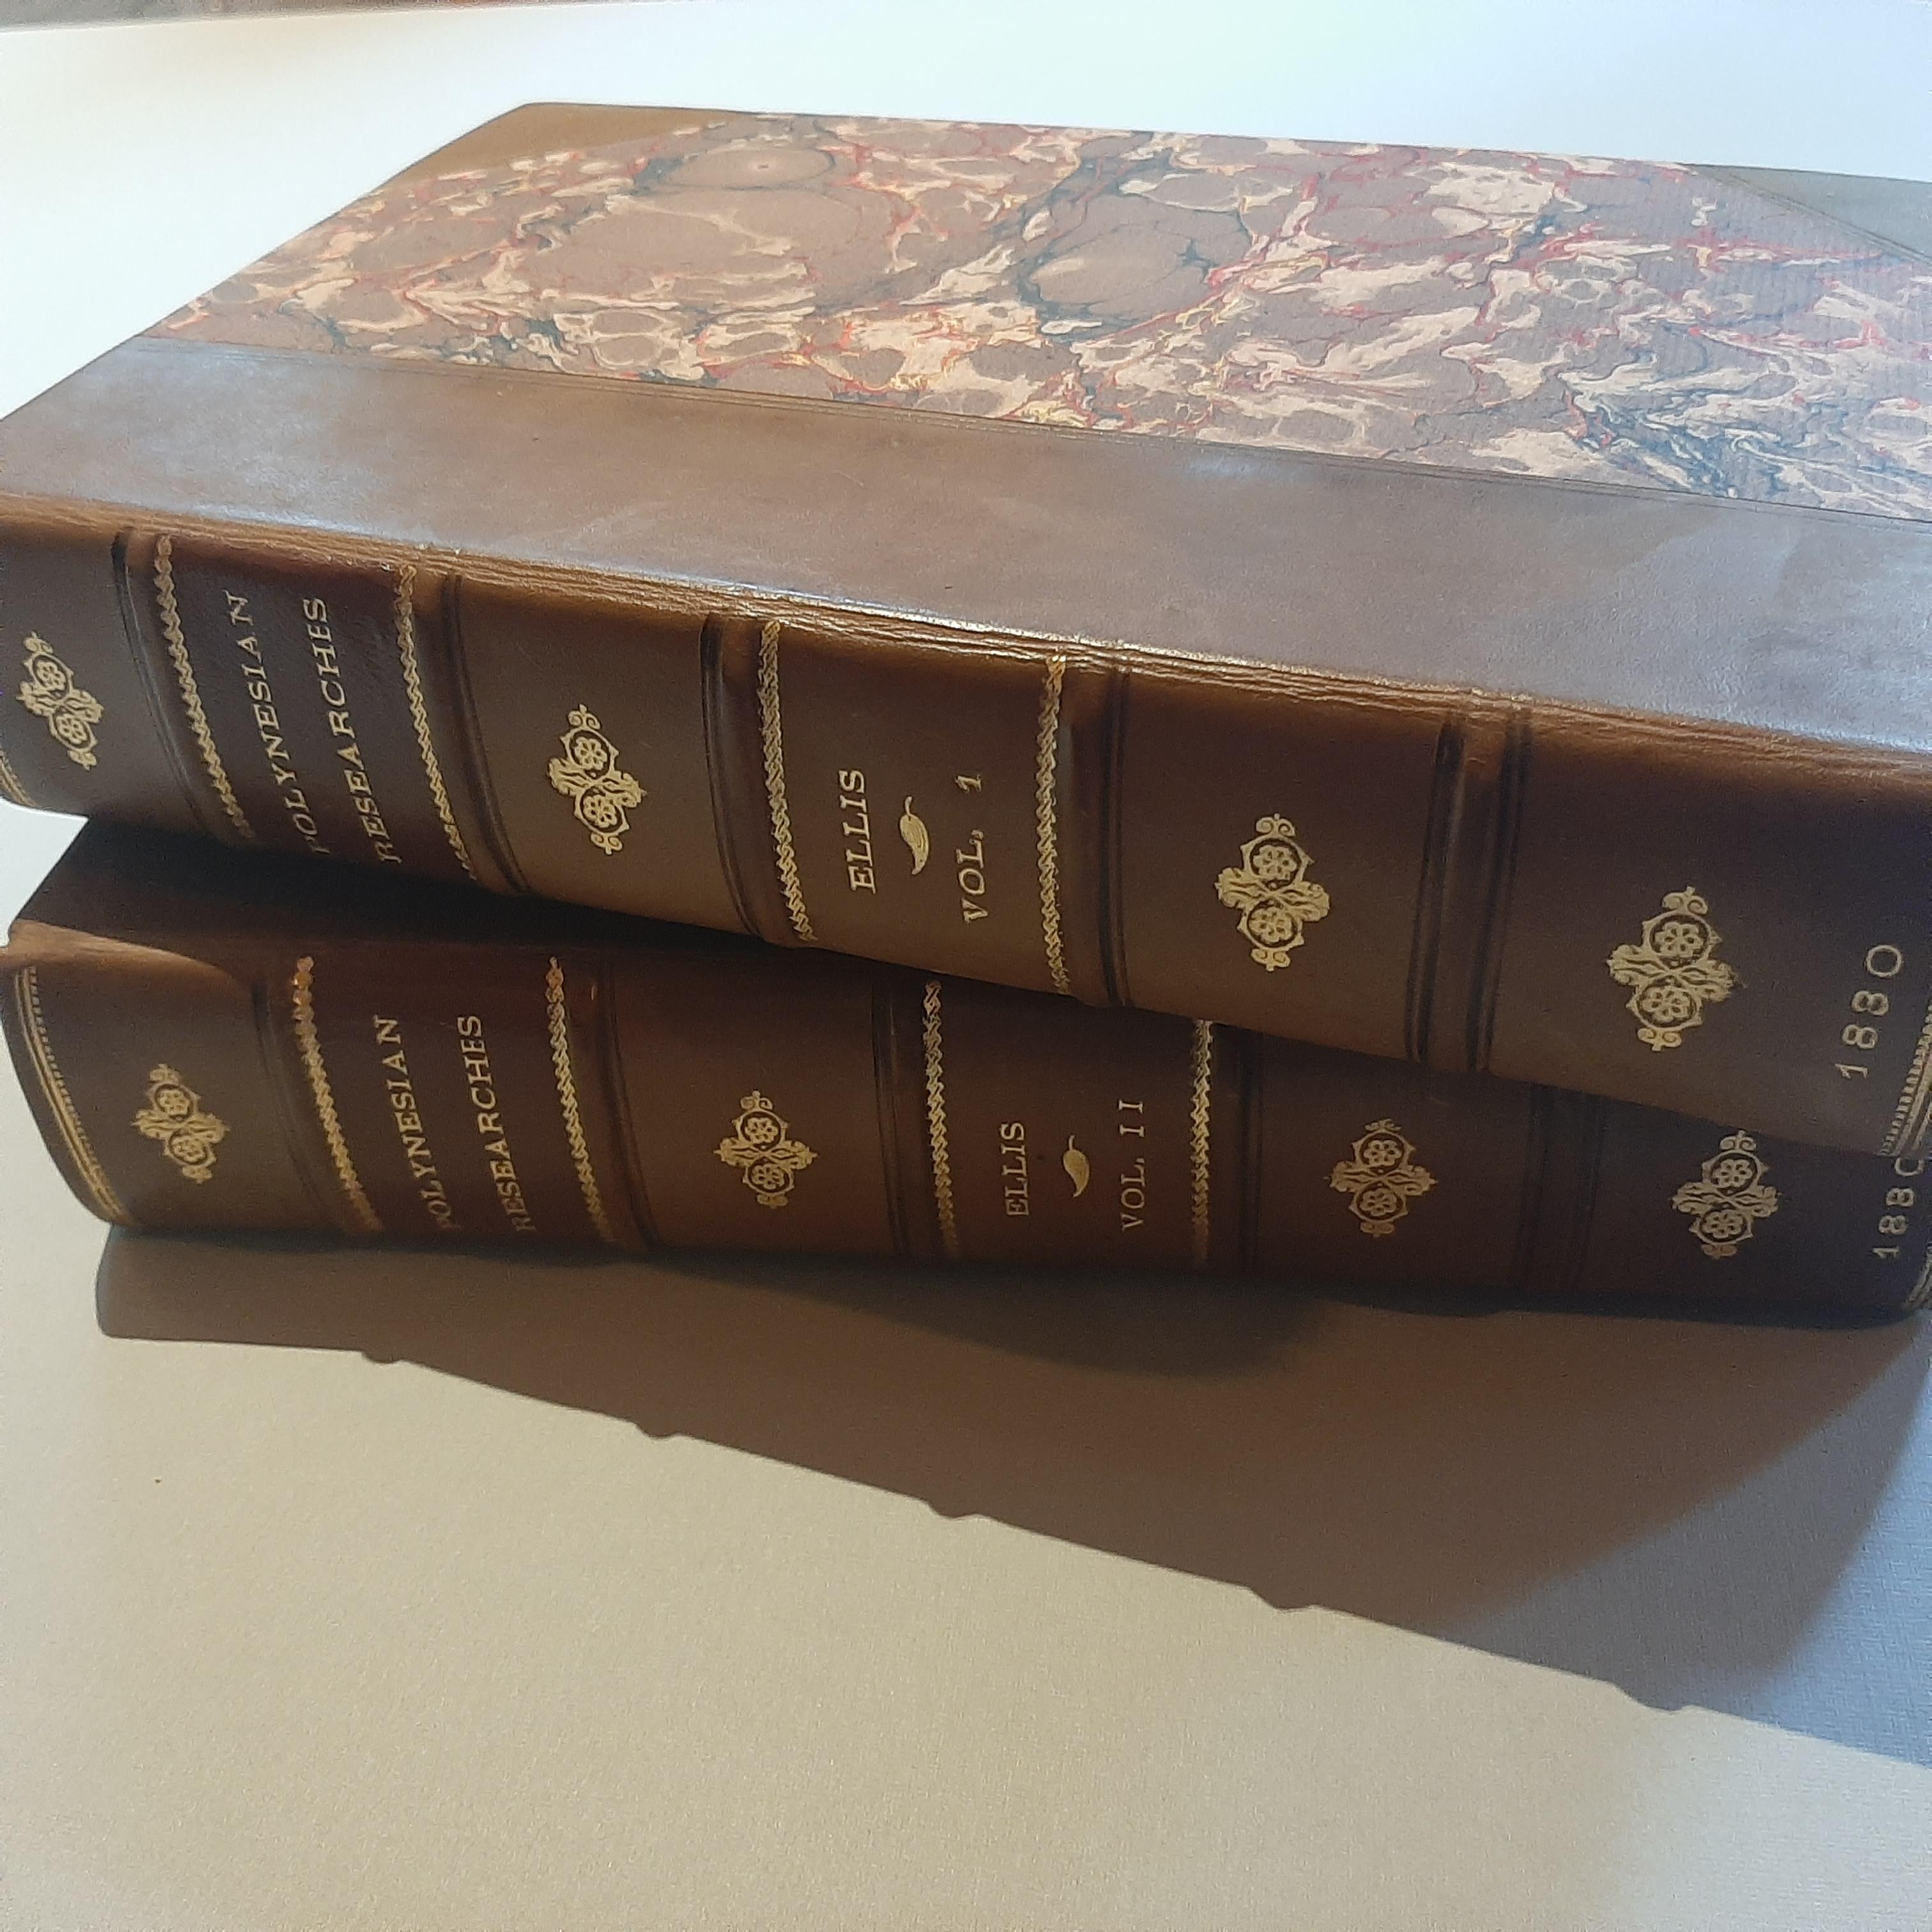 Two volumes 'Polynesian Researches, during a Residence of Nearly Six Years in the South Sea Islands' by William Ellis. Second edition, 2 engraved maps, one folding, 8 engraved plates, tissue guards, wood-engraved illustrations, light marginal foxing